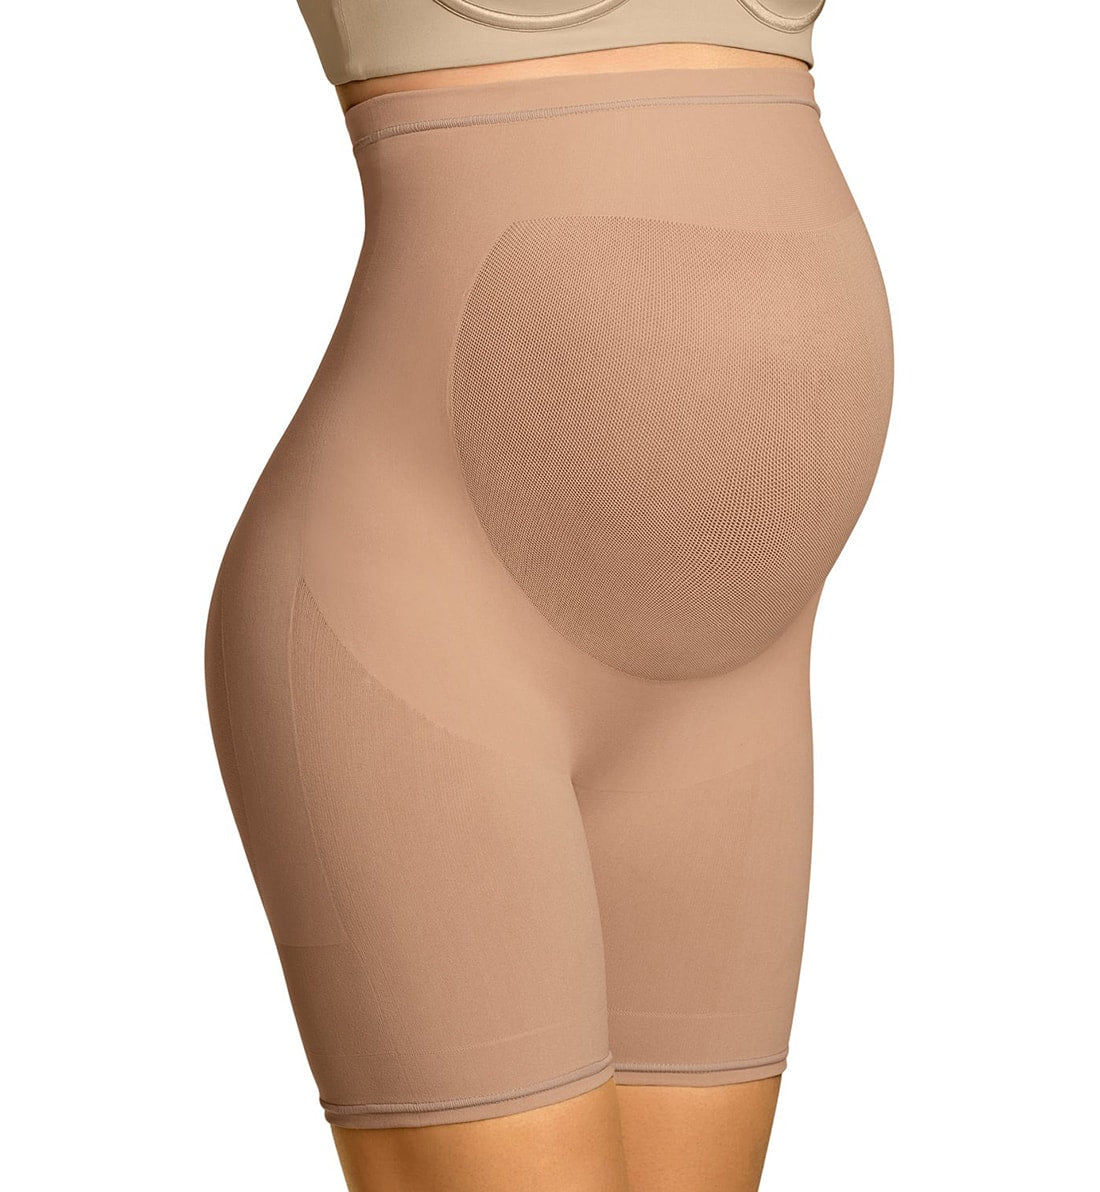 Leonisa Seamless Maternity Support Panty (012859),Small,Beige - Beige,Small